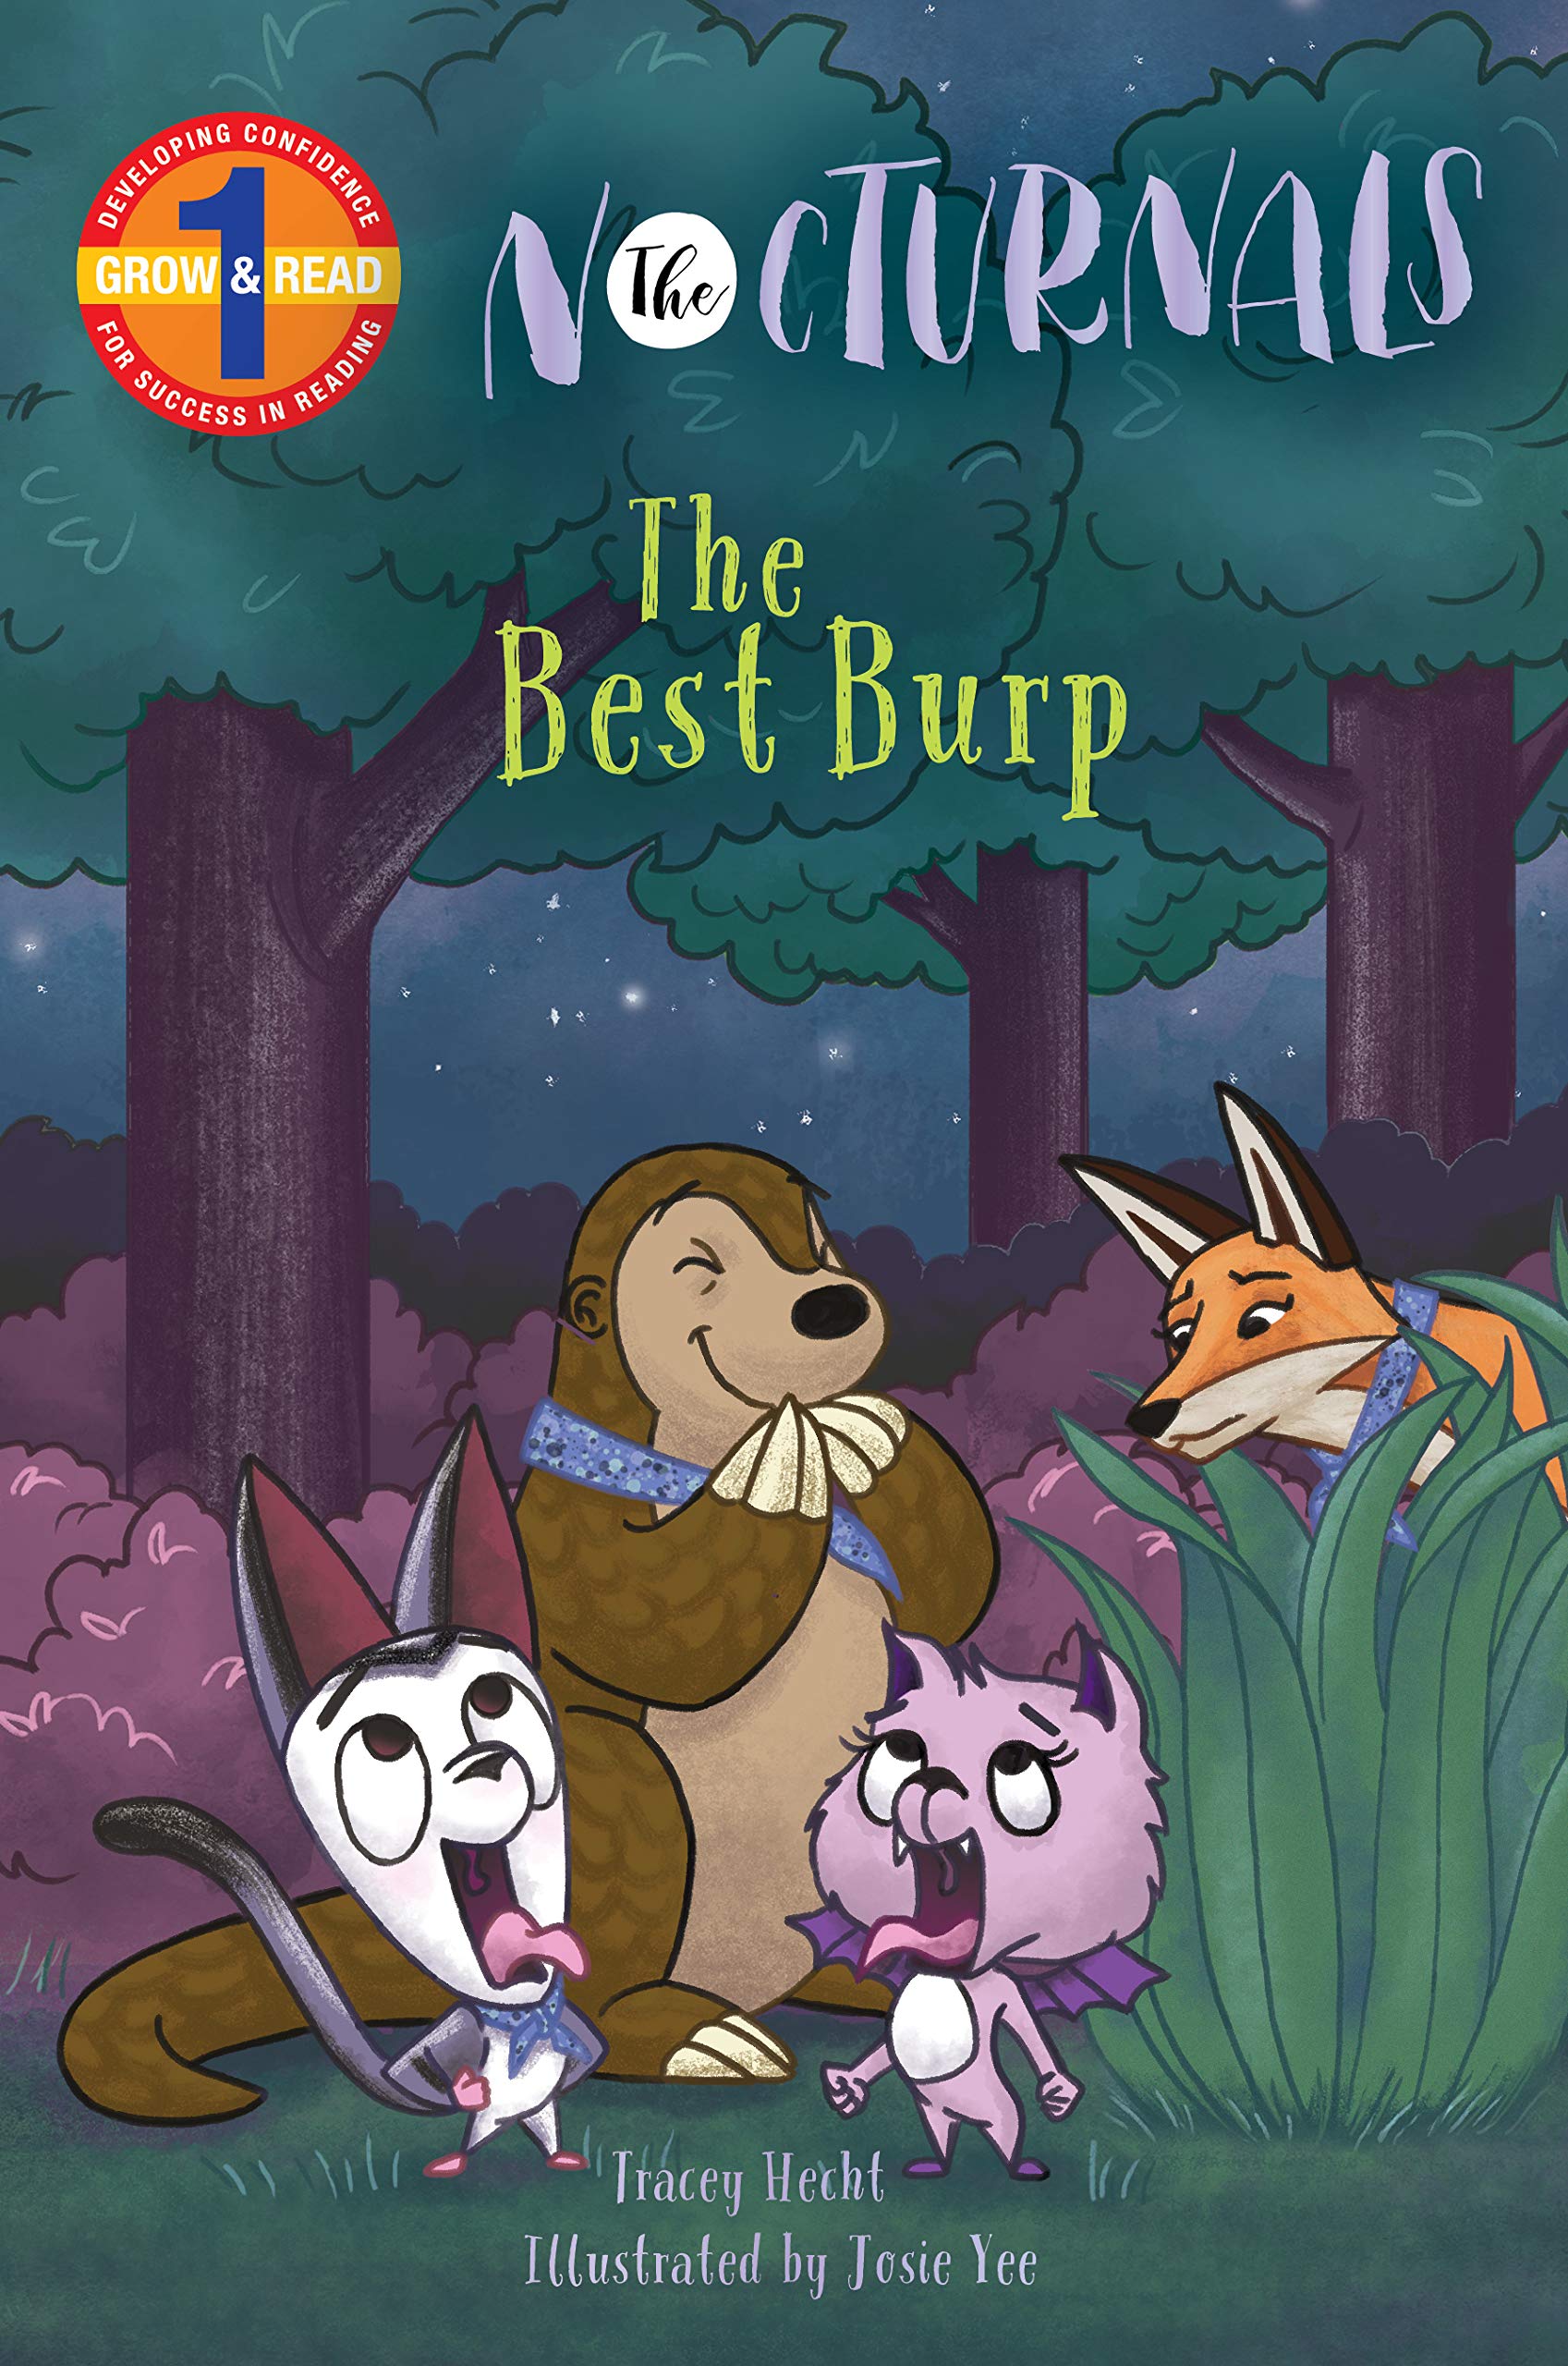 The Best Burp: The Nocturnals (Grow & Read Early Reader, Level 1)